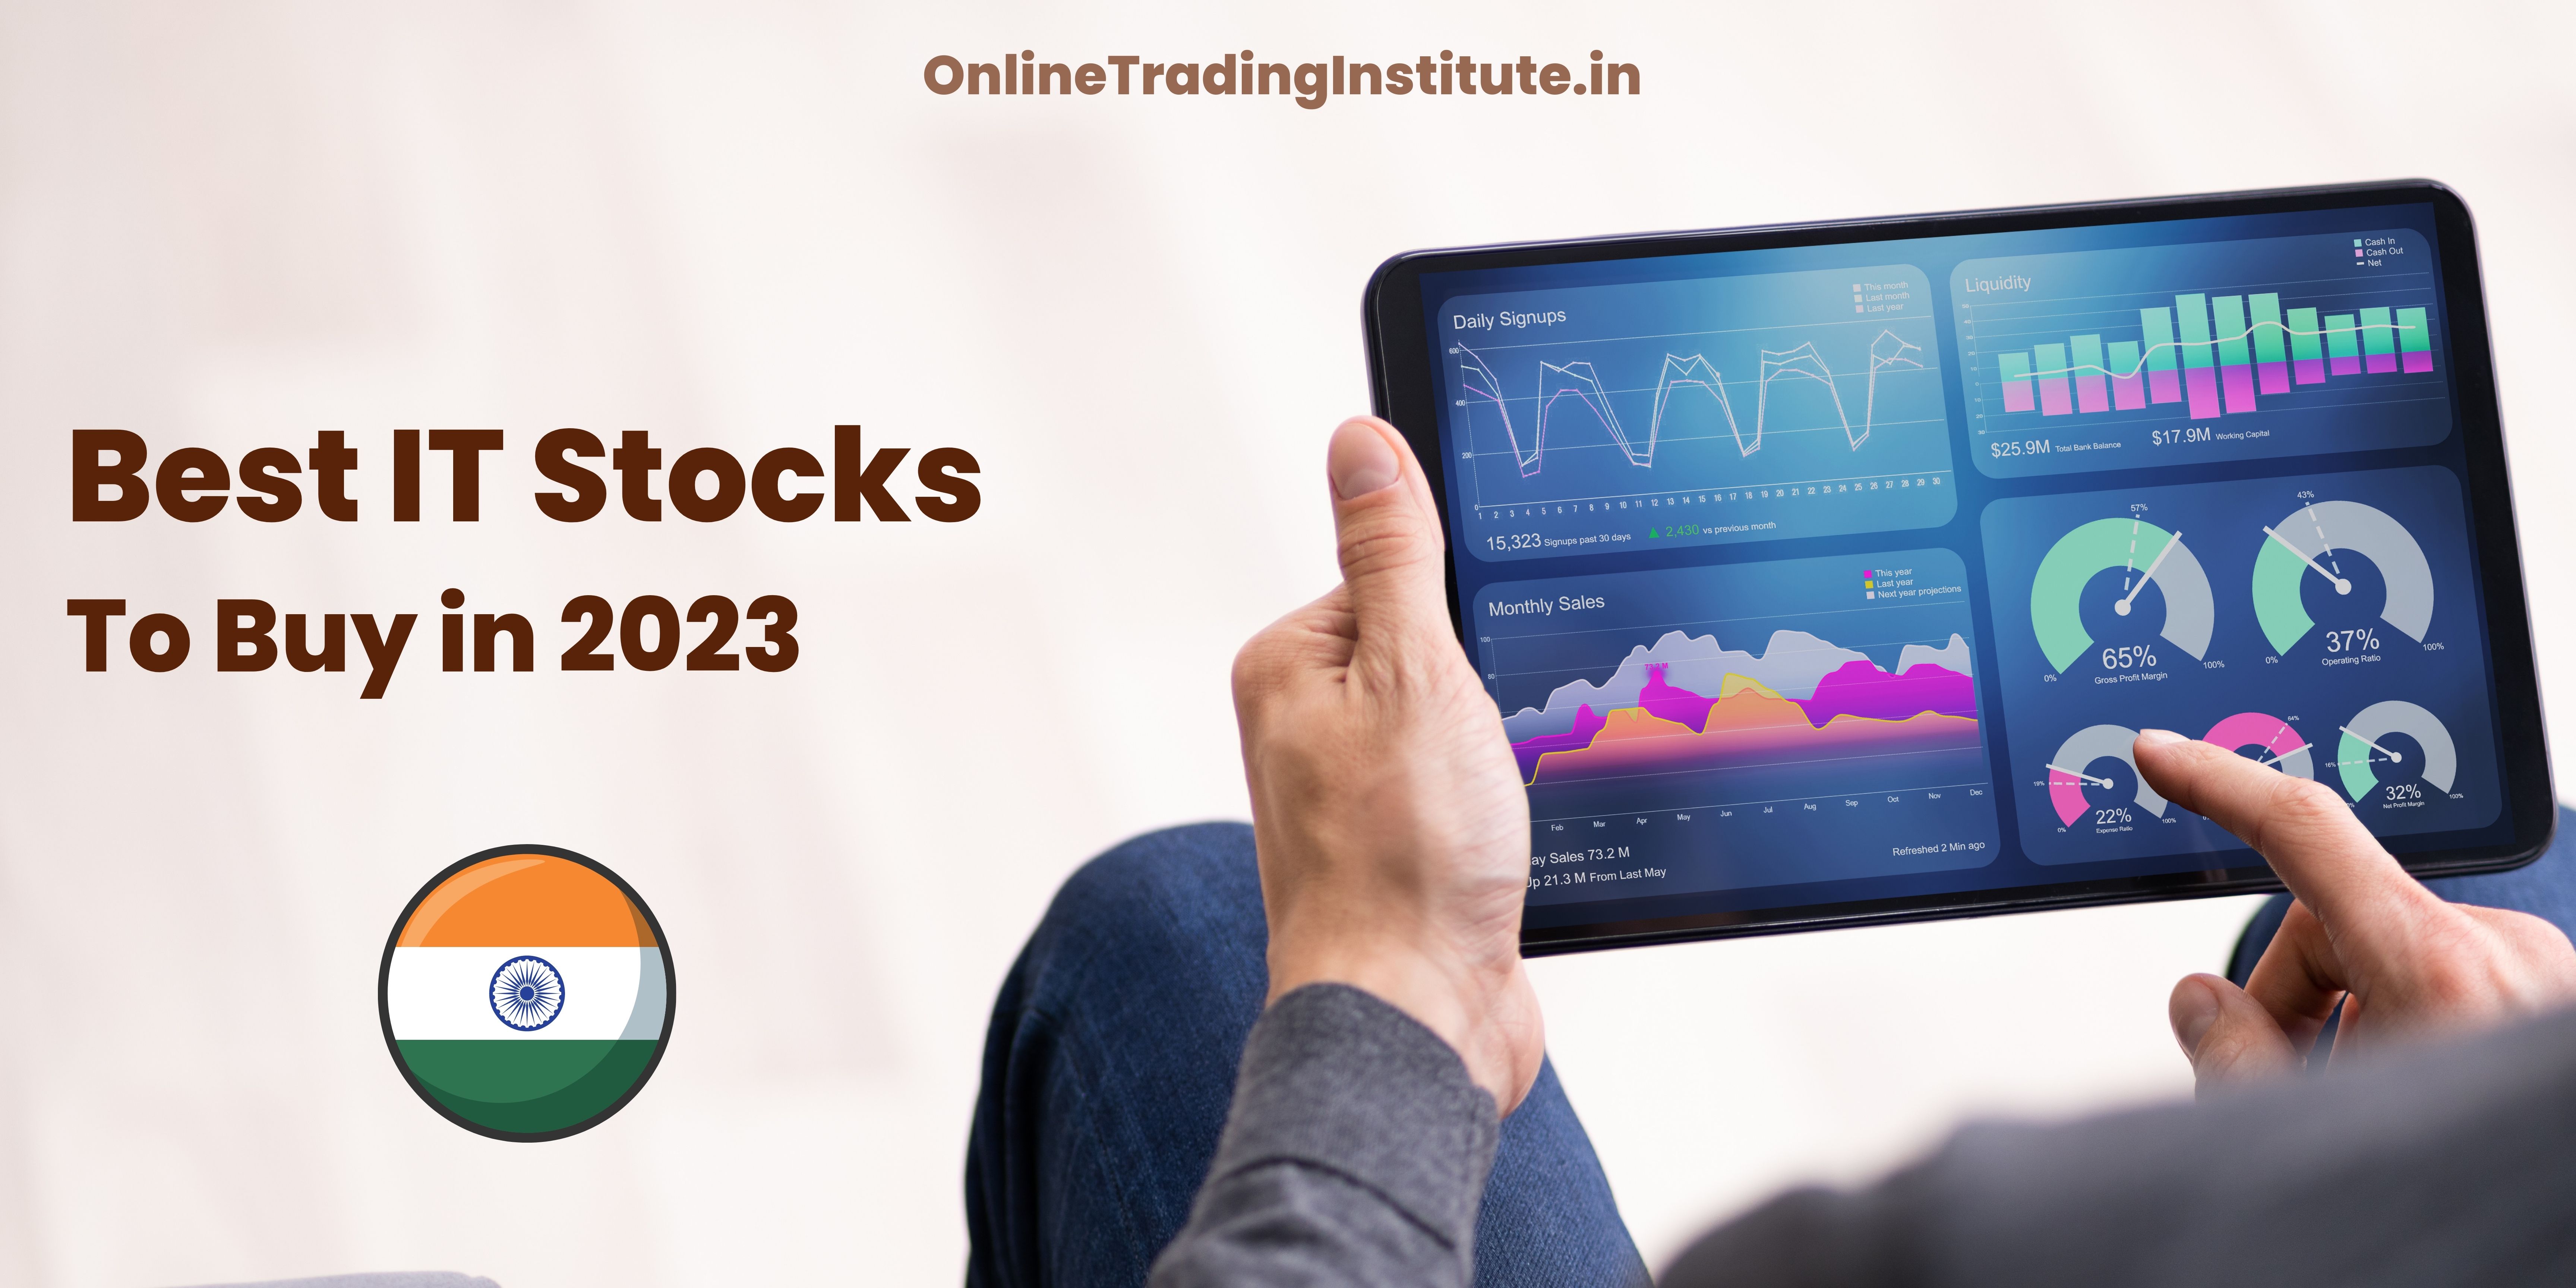 Top IT Stocks that you should buy today in the Indian Market